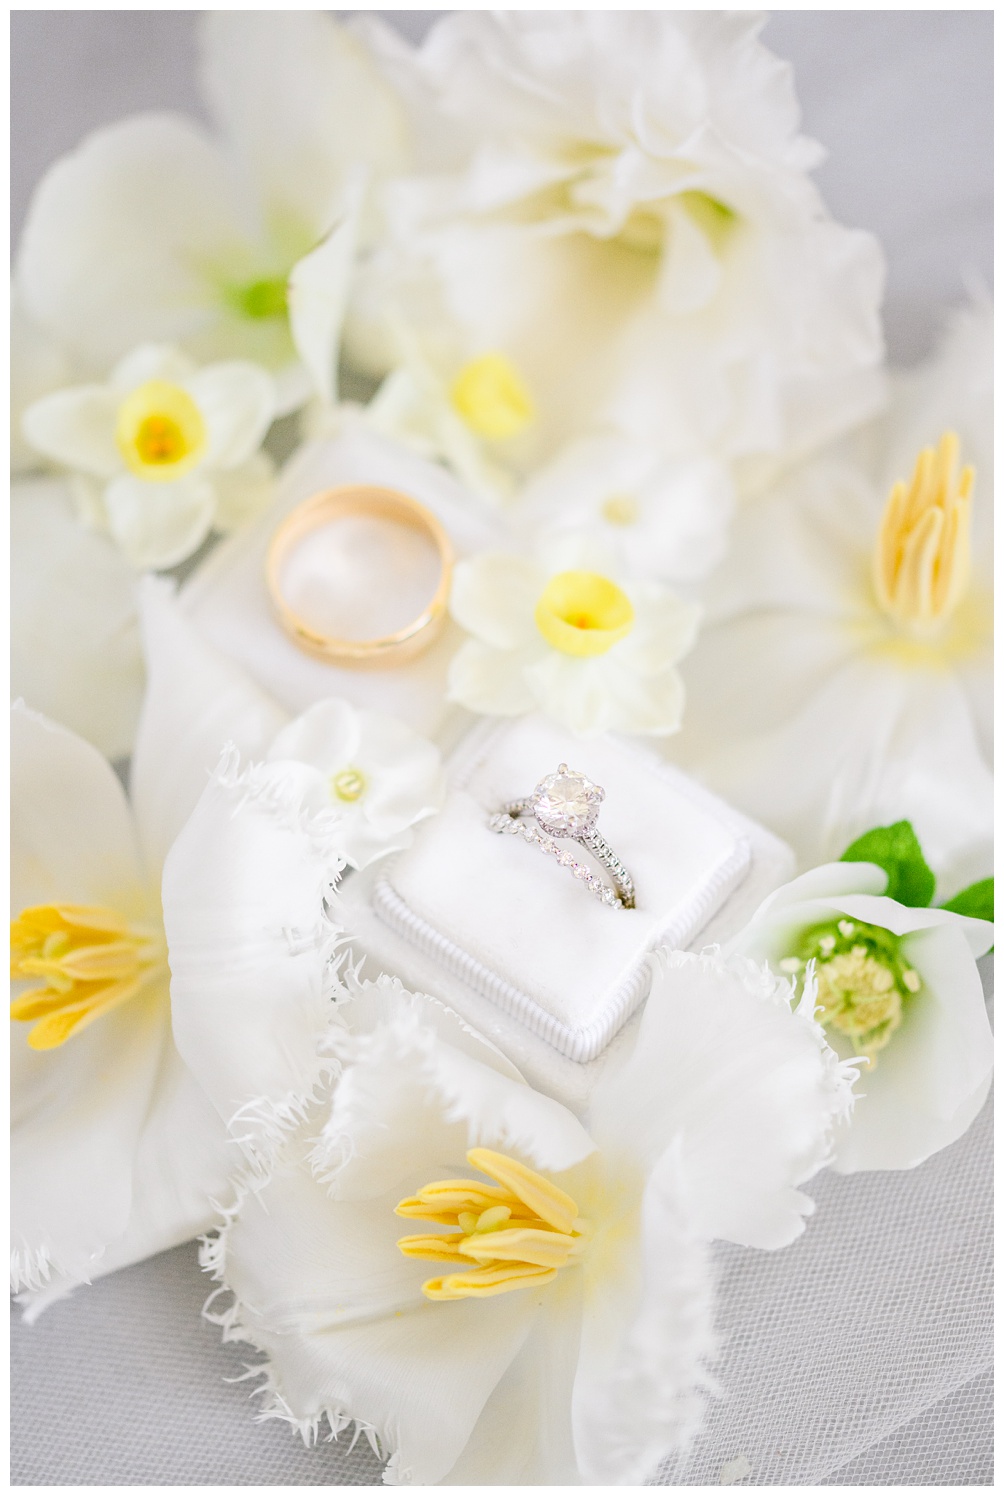 Photo of wedding rings surrounded by white and yellow flowers